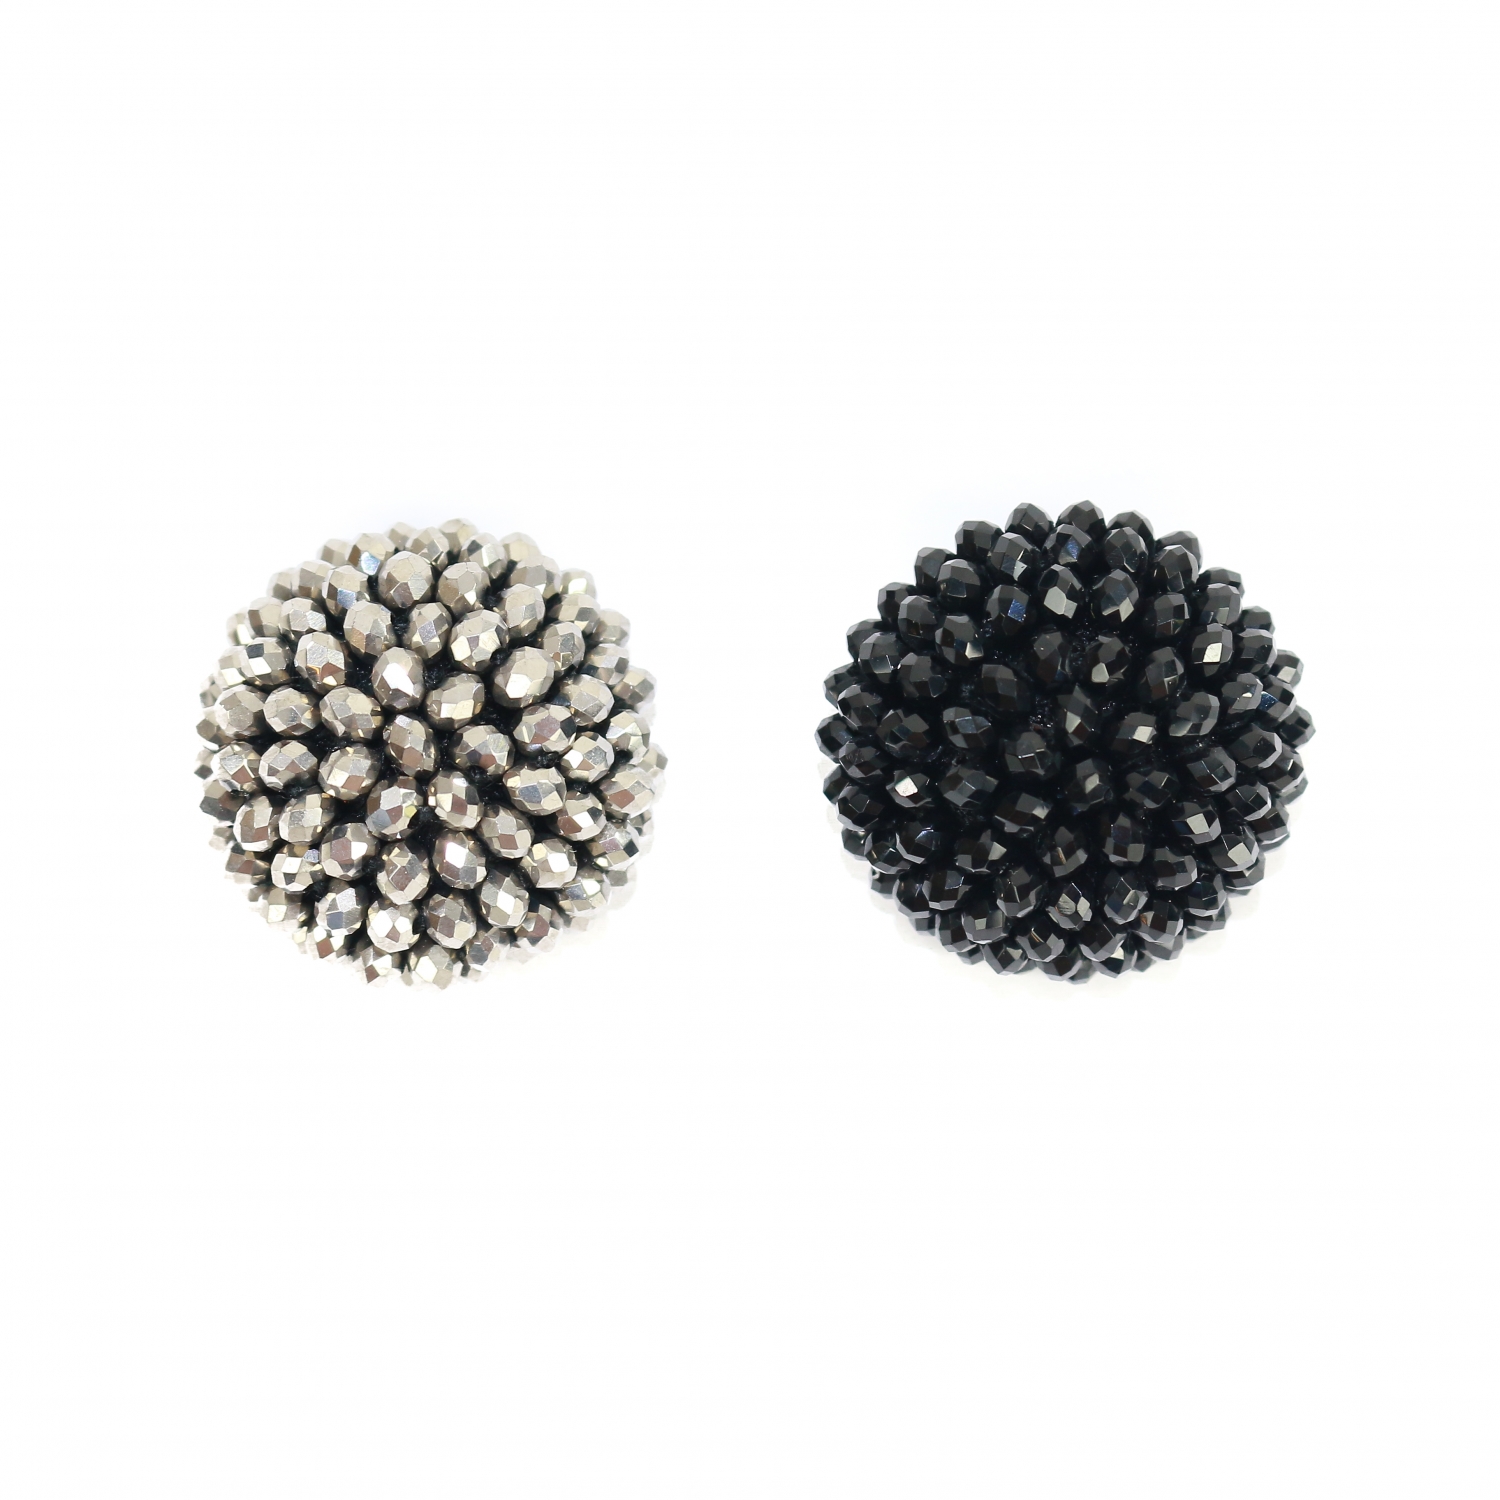 Shank Buttons with Beads, 3x2 cm, (10 pcs/pack) Code: BT0821